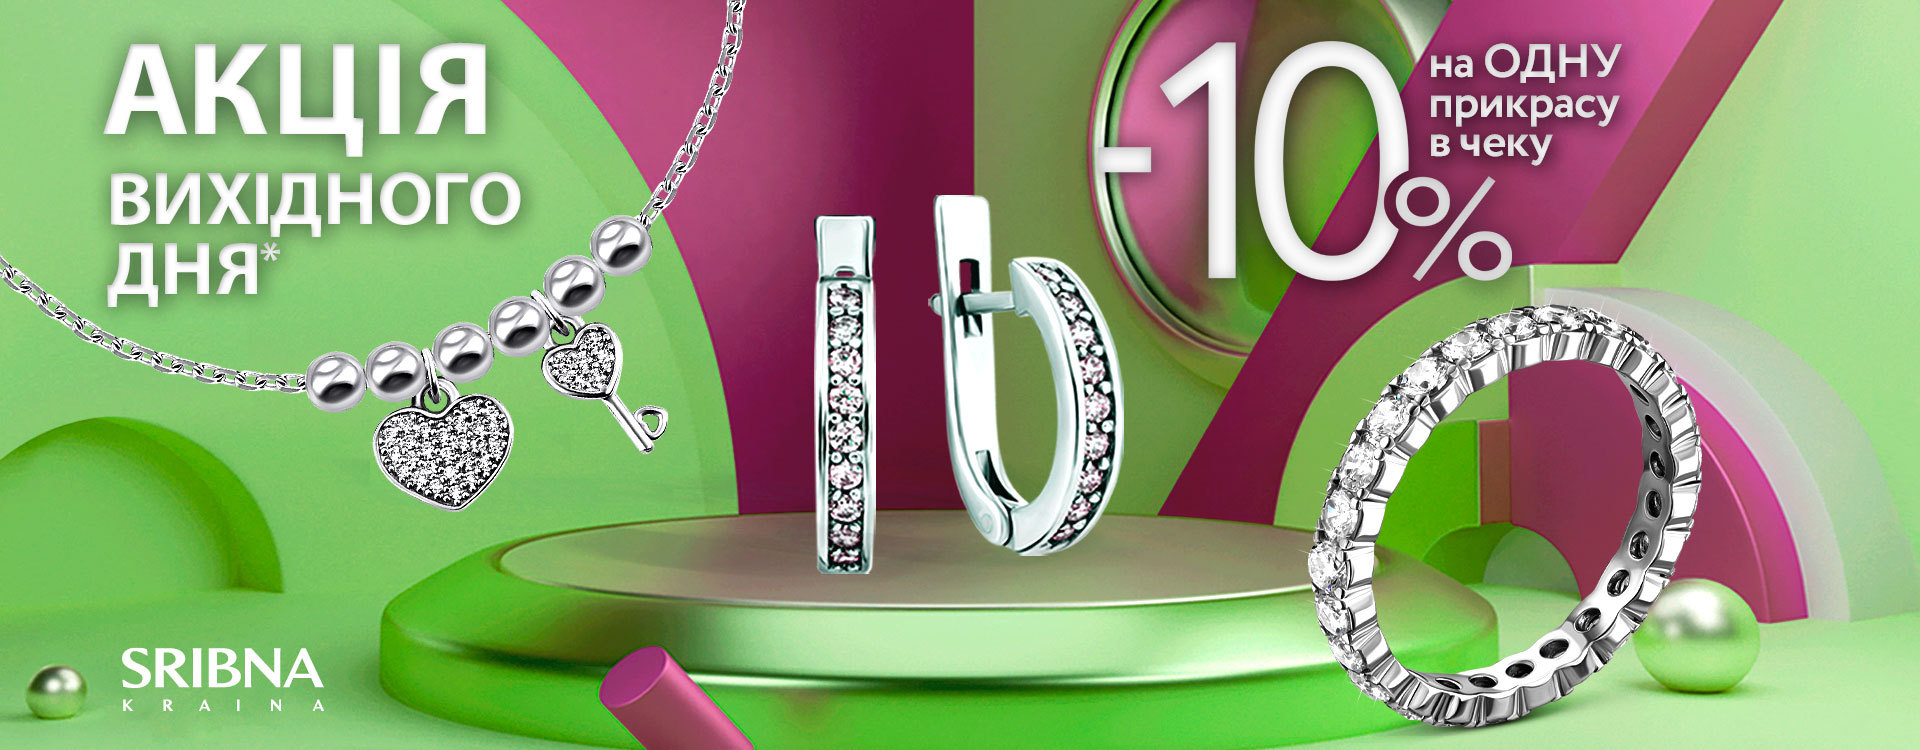 Get -10% on one piece of jewelry